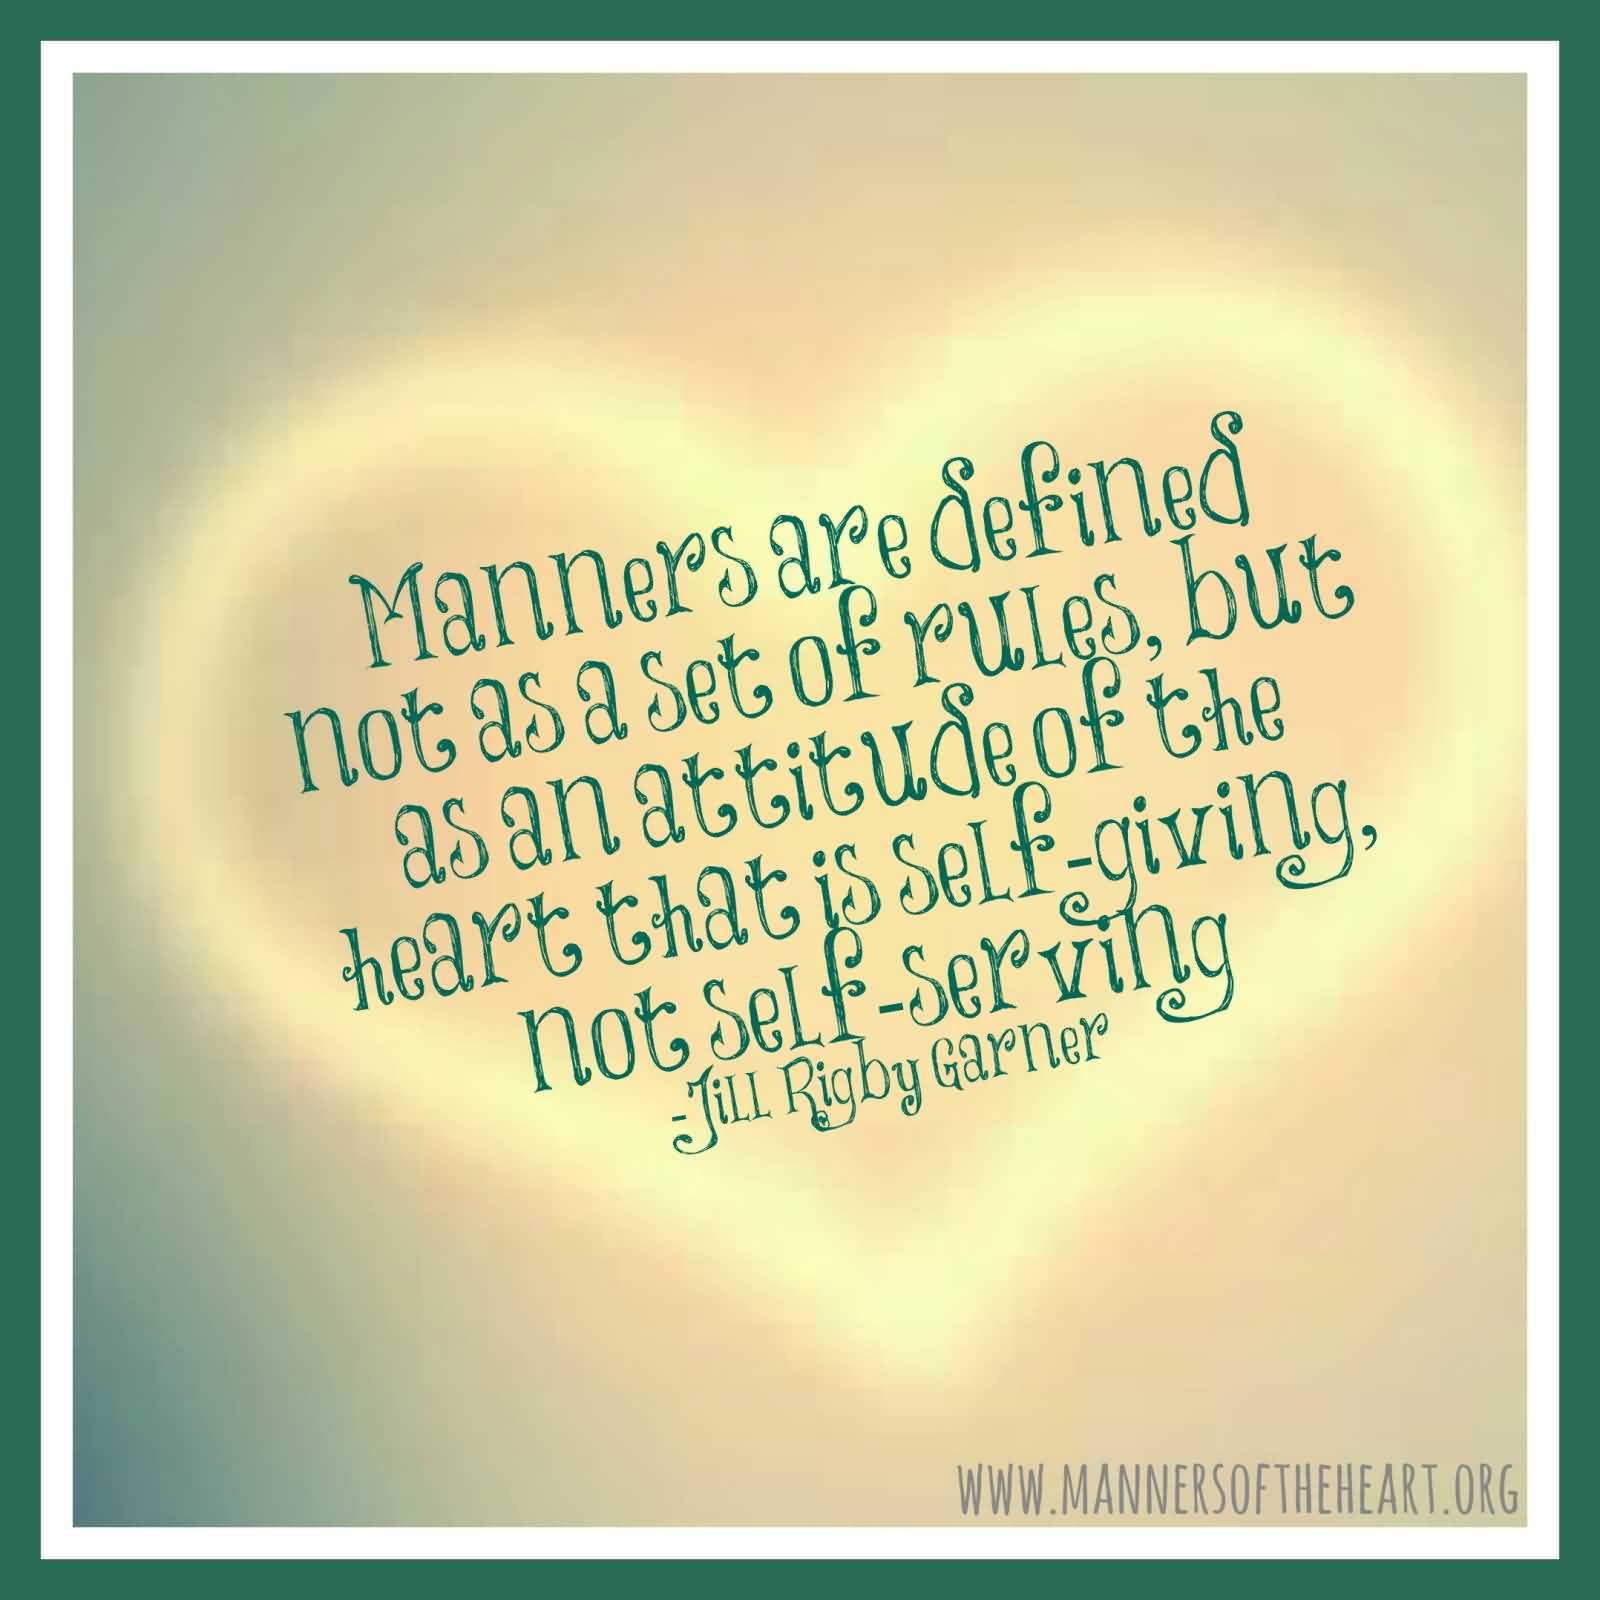 Manners are defined not as a set of rules, but as an attitude of the haert that is self-giving, not ... Jill Rigby Garner